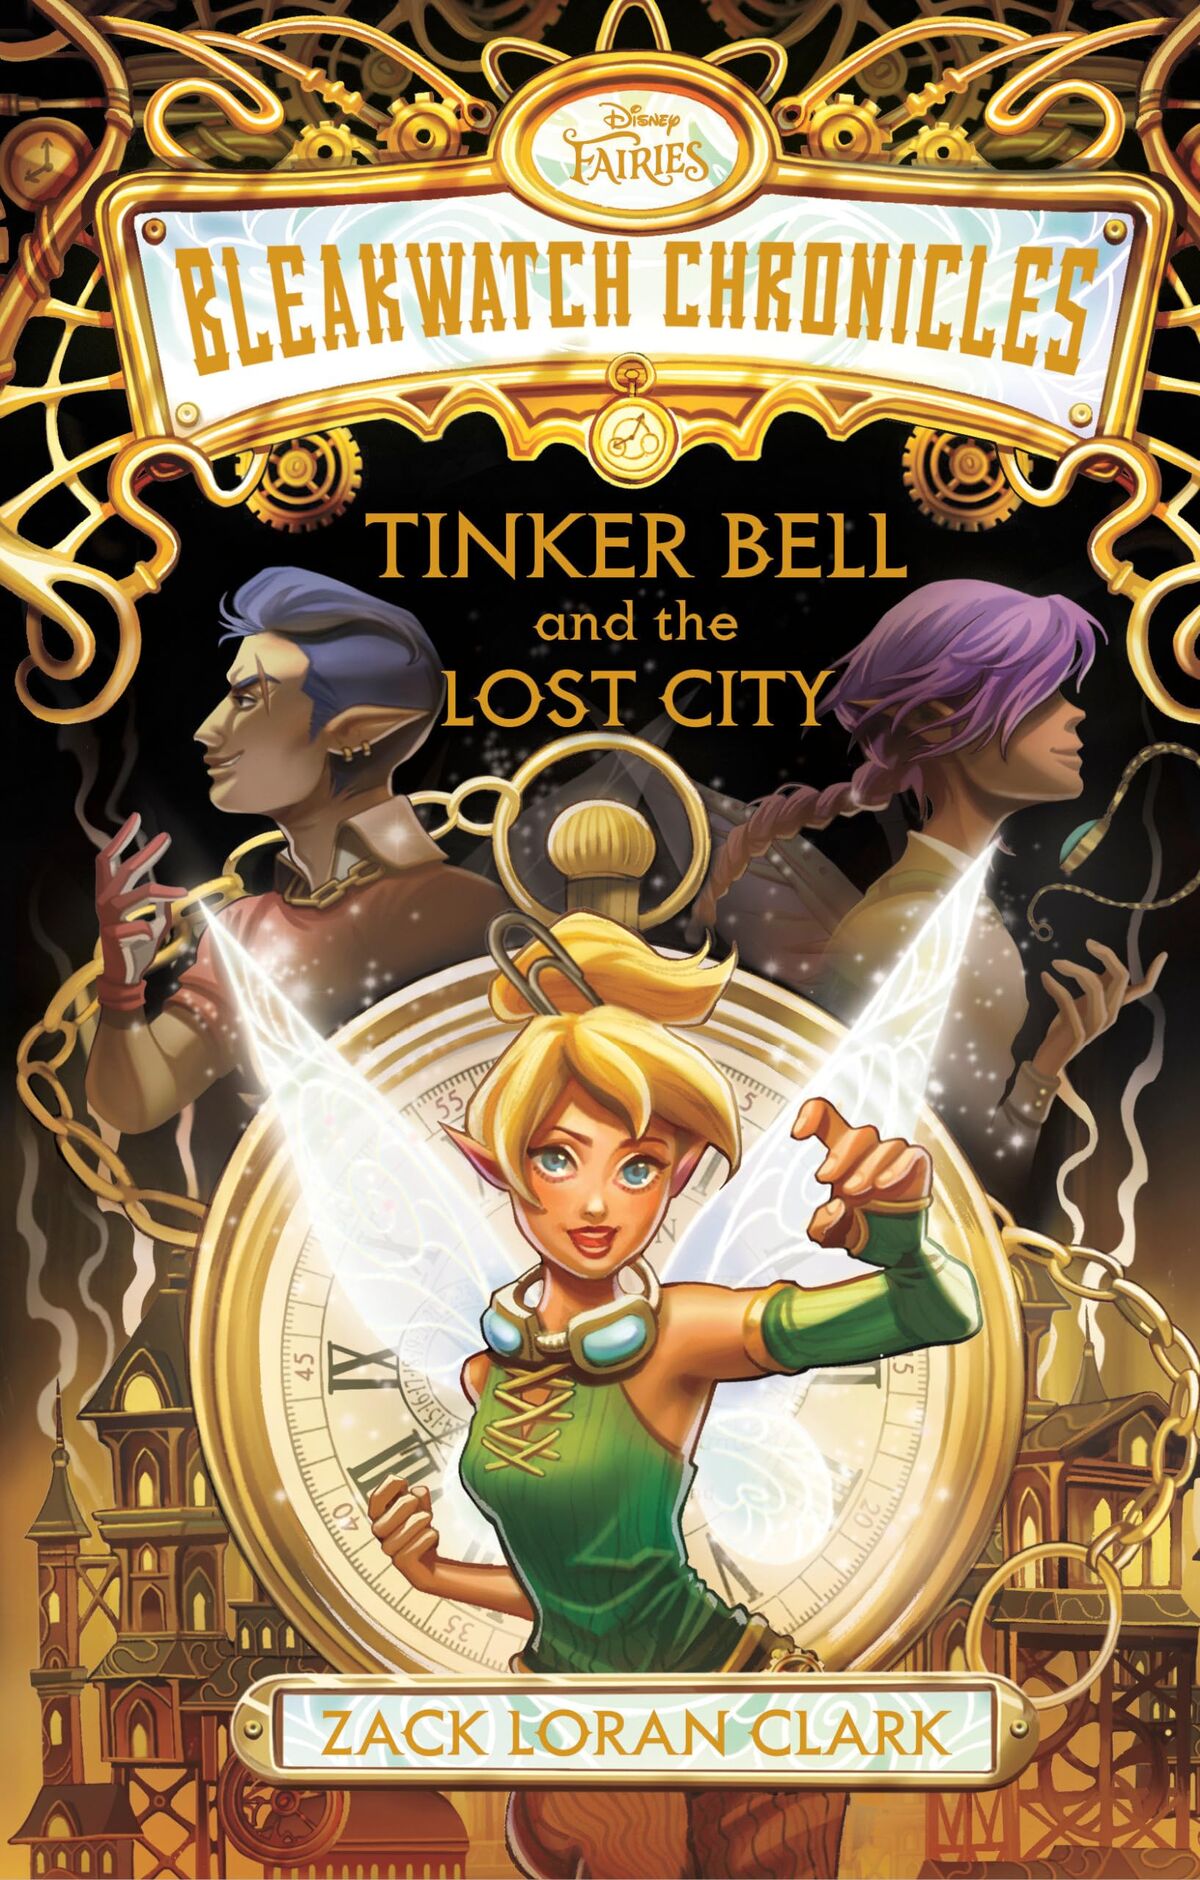 Bleakwatch Chronicles: Tinker Bell and the Lost City | Disney Fairies Wiki  | Fandom